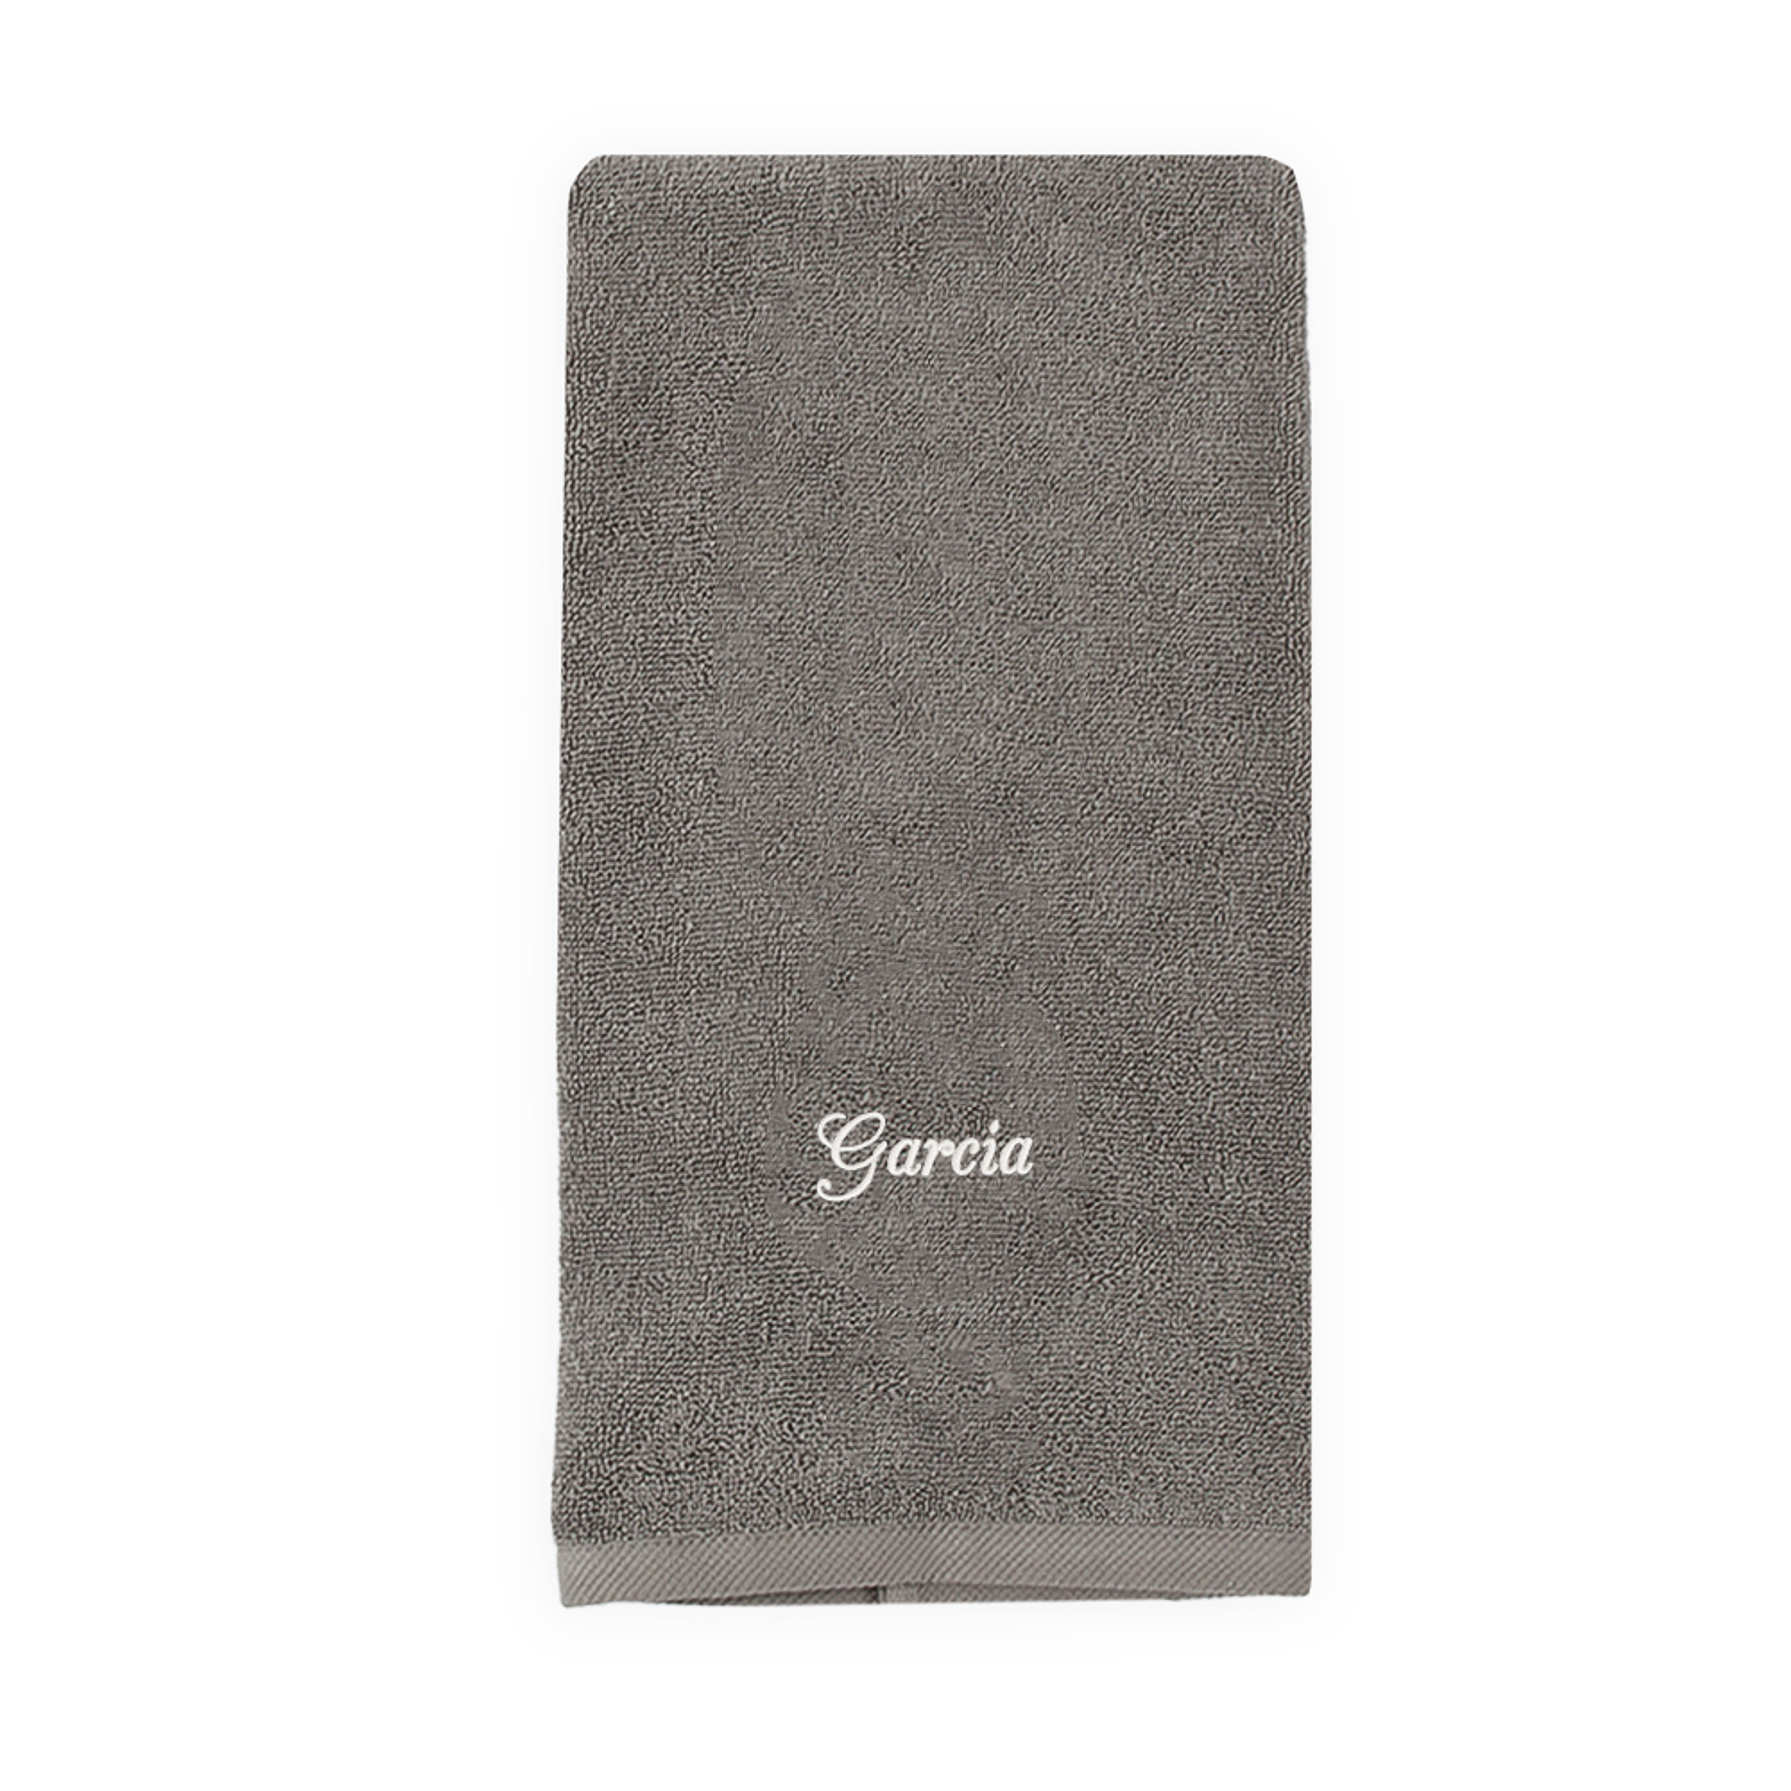 Personalized Hand Towel